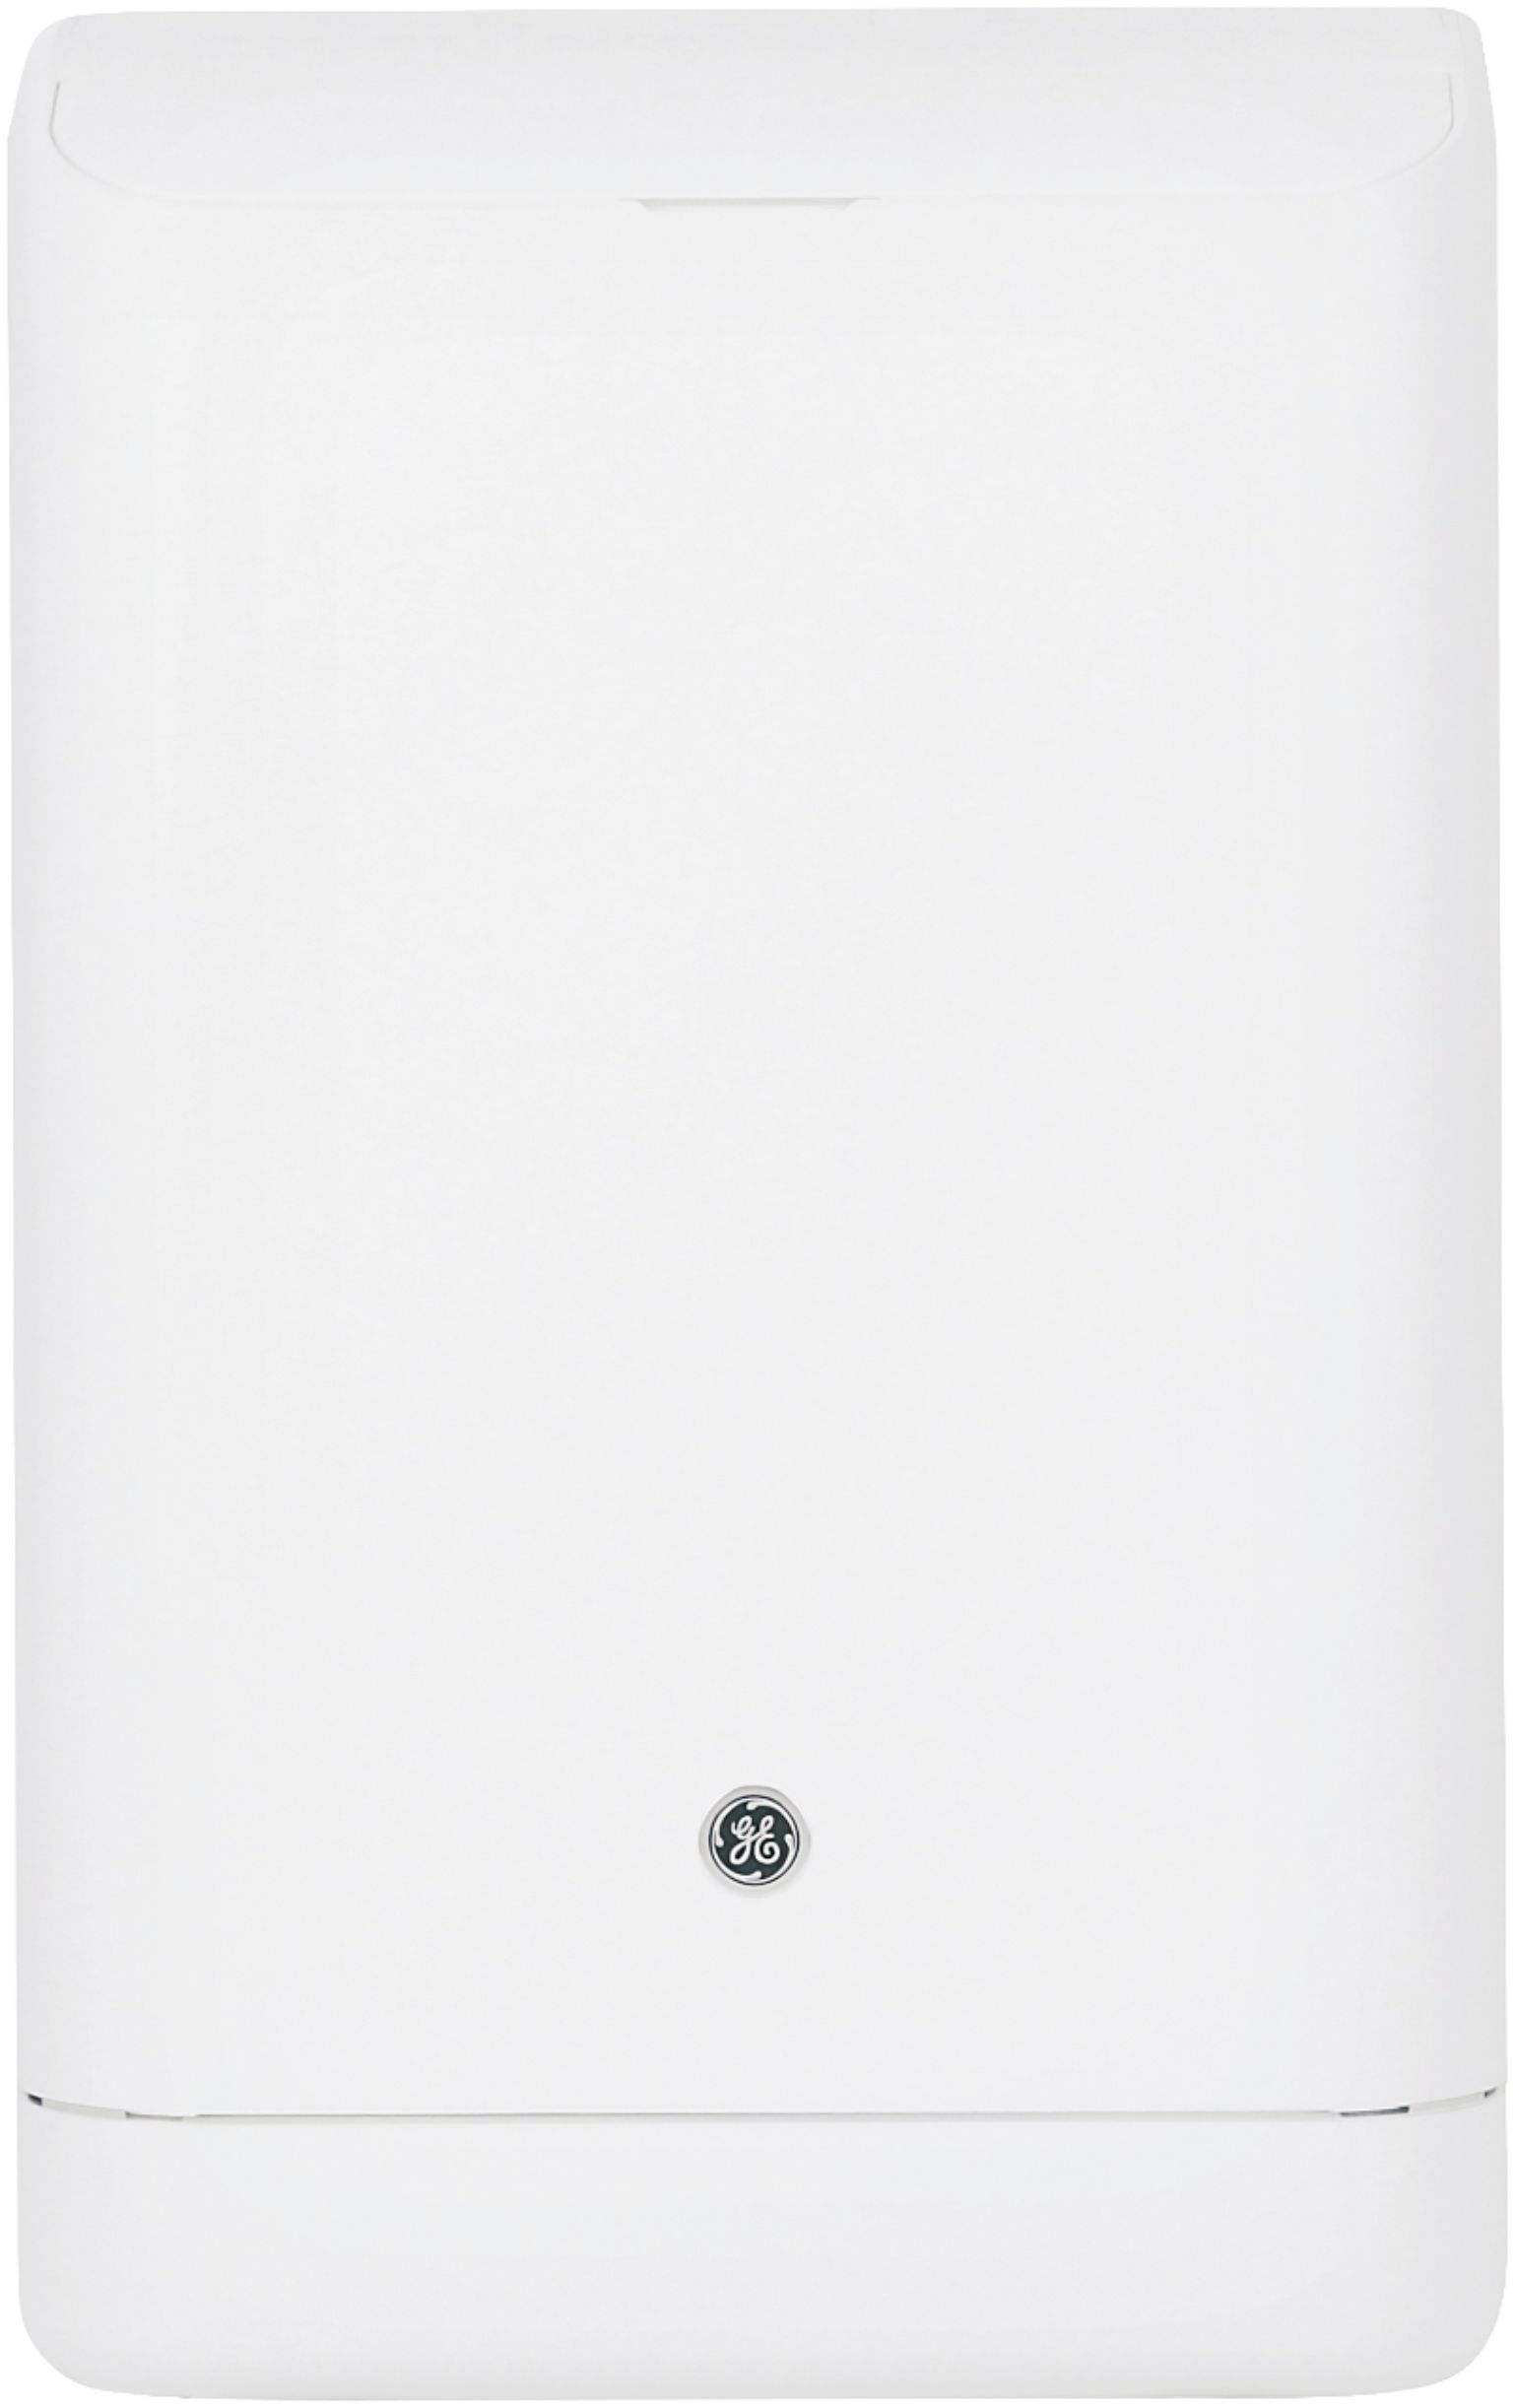 GE - 350 Sq. Ft. Portable Air Conditioner - White